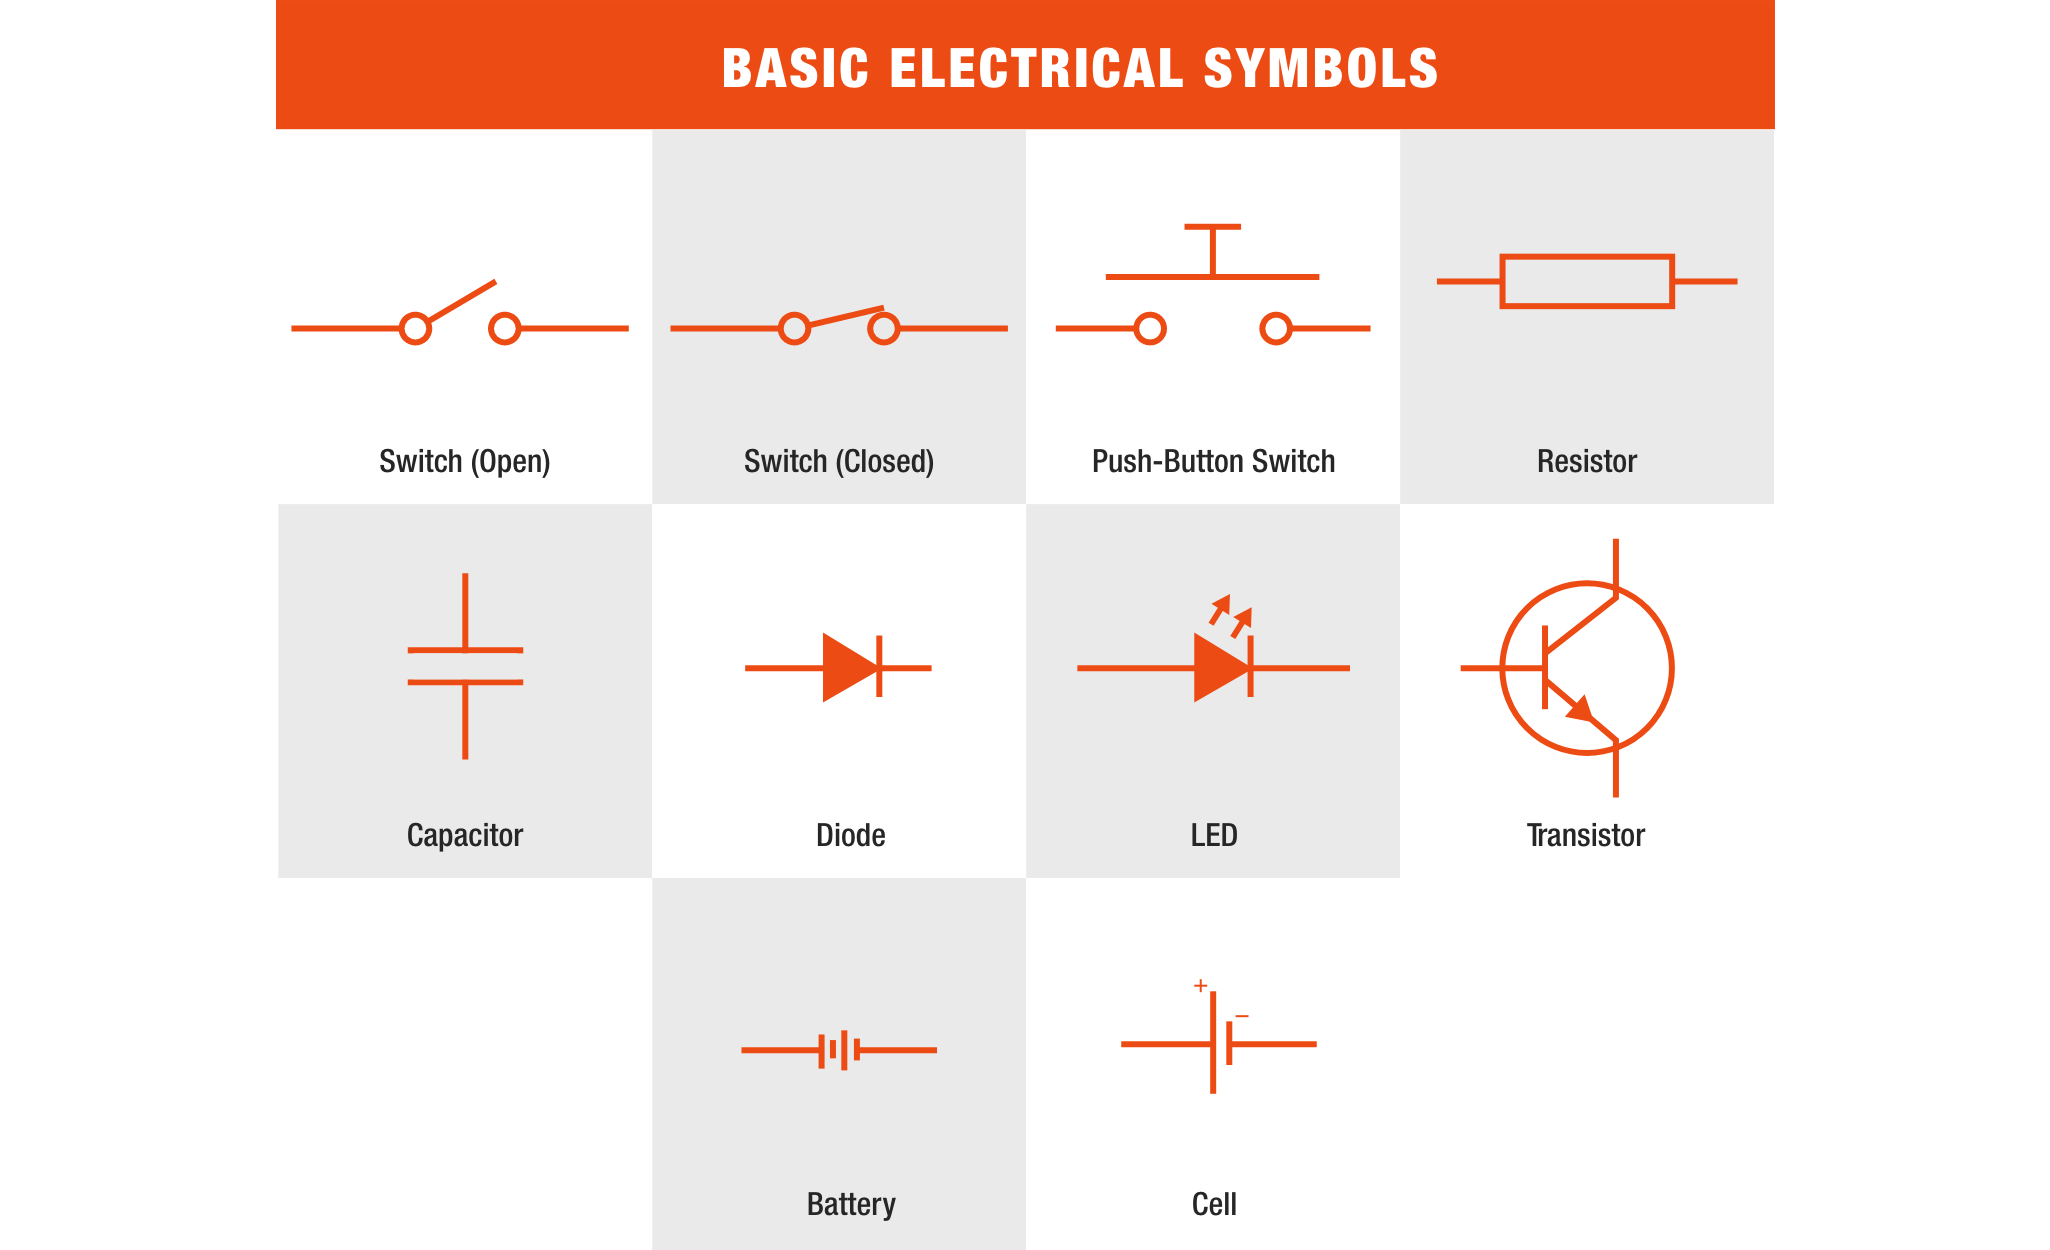 A graphic shows basic electrical symbols.